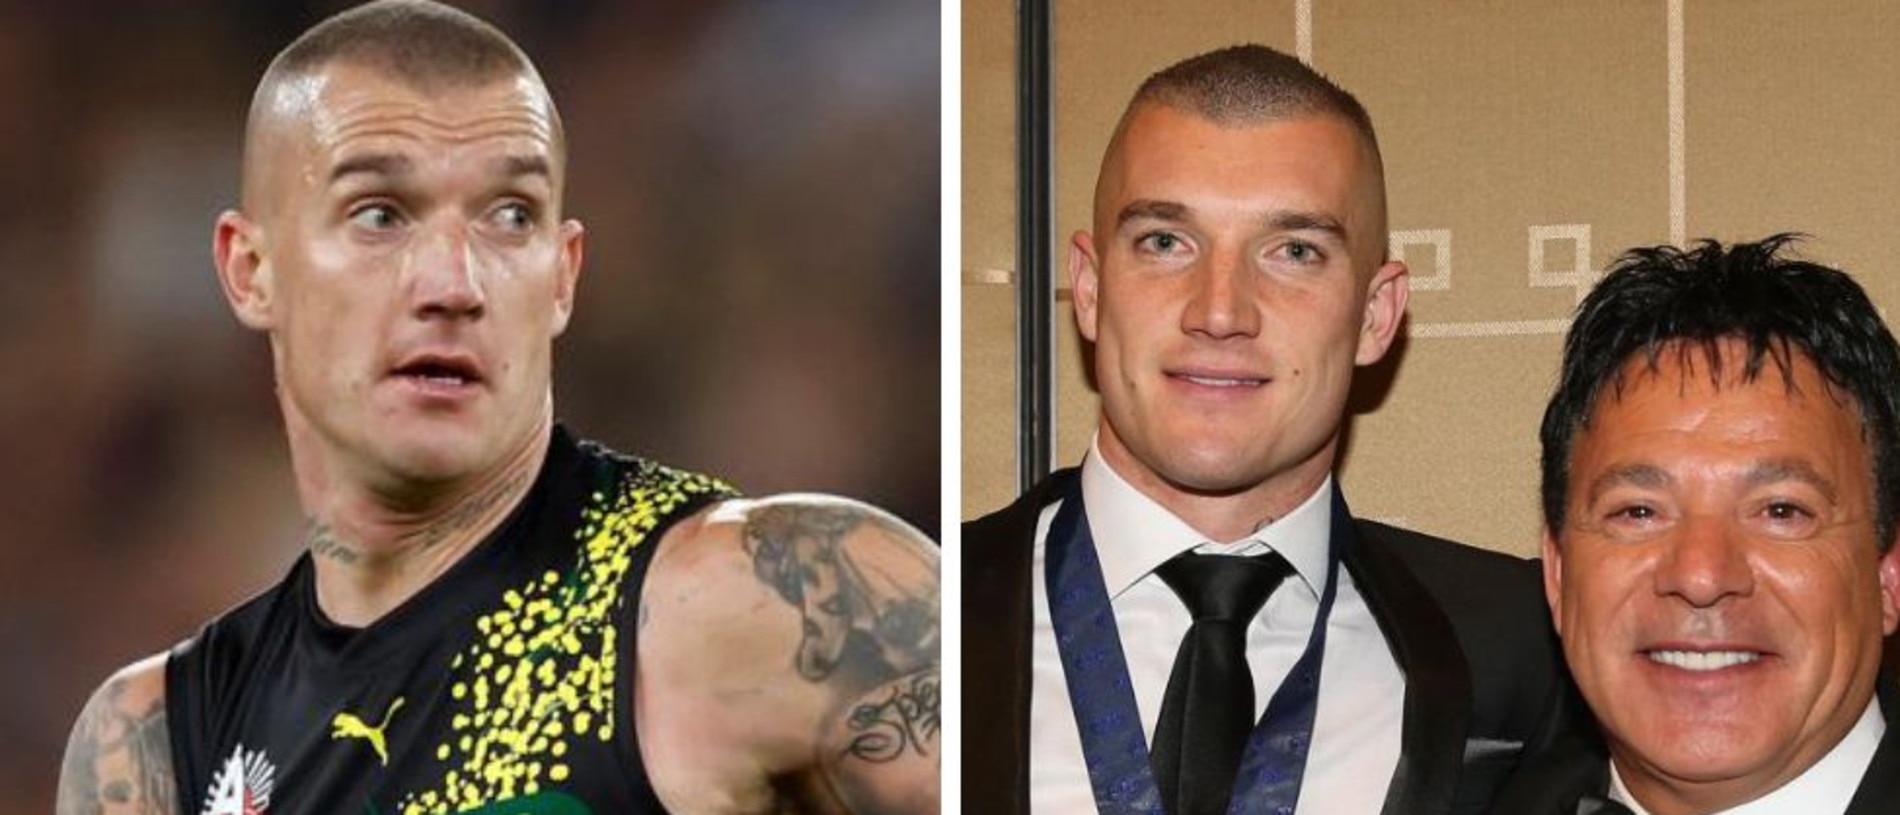 Dustin Martin and his managed Ralph Carr.